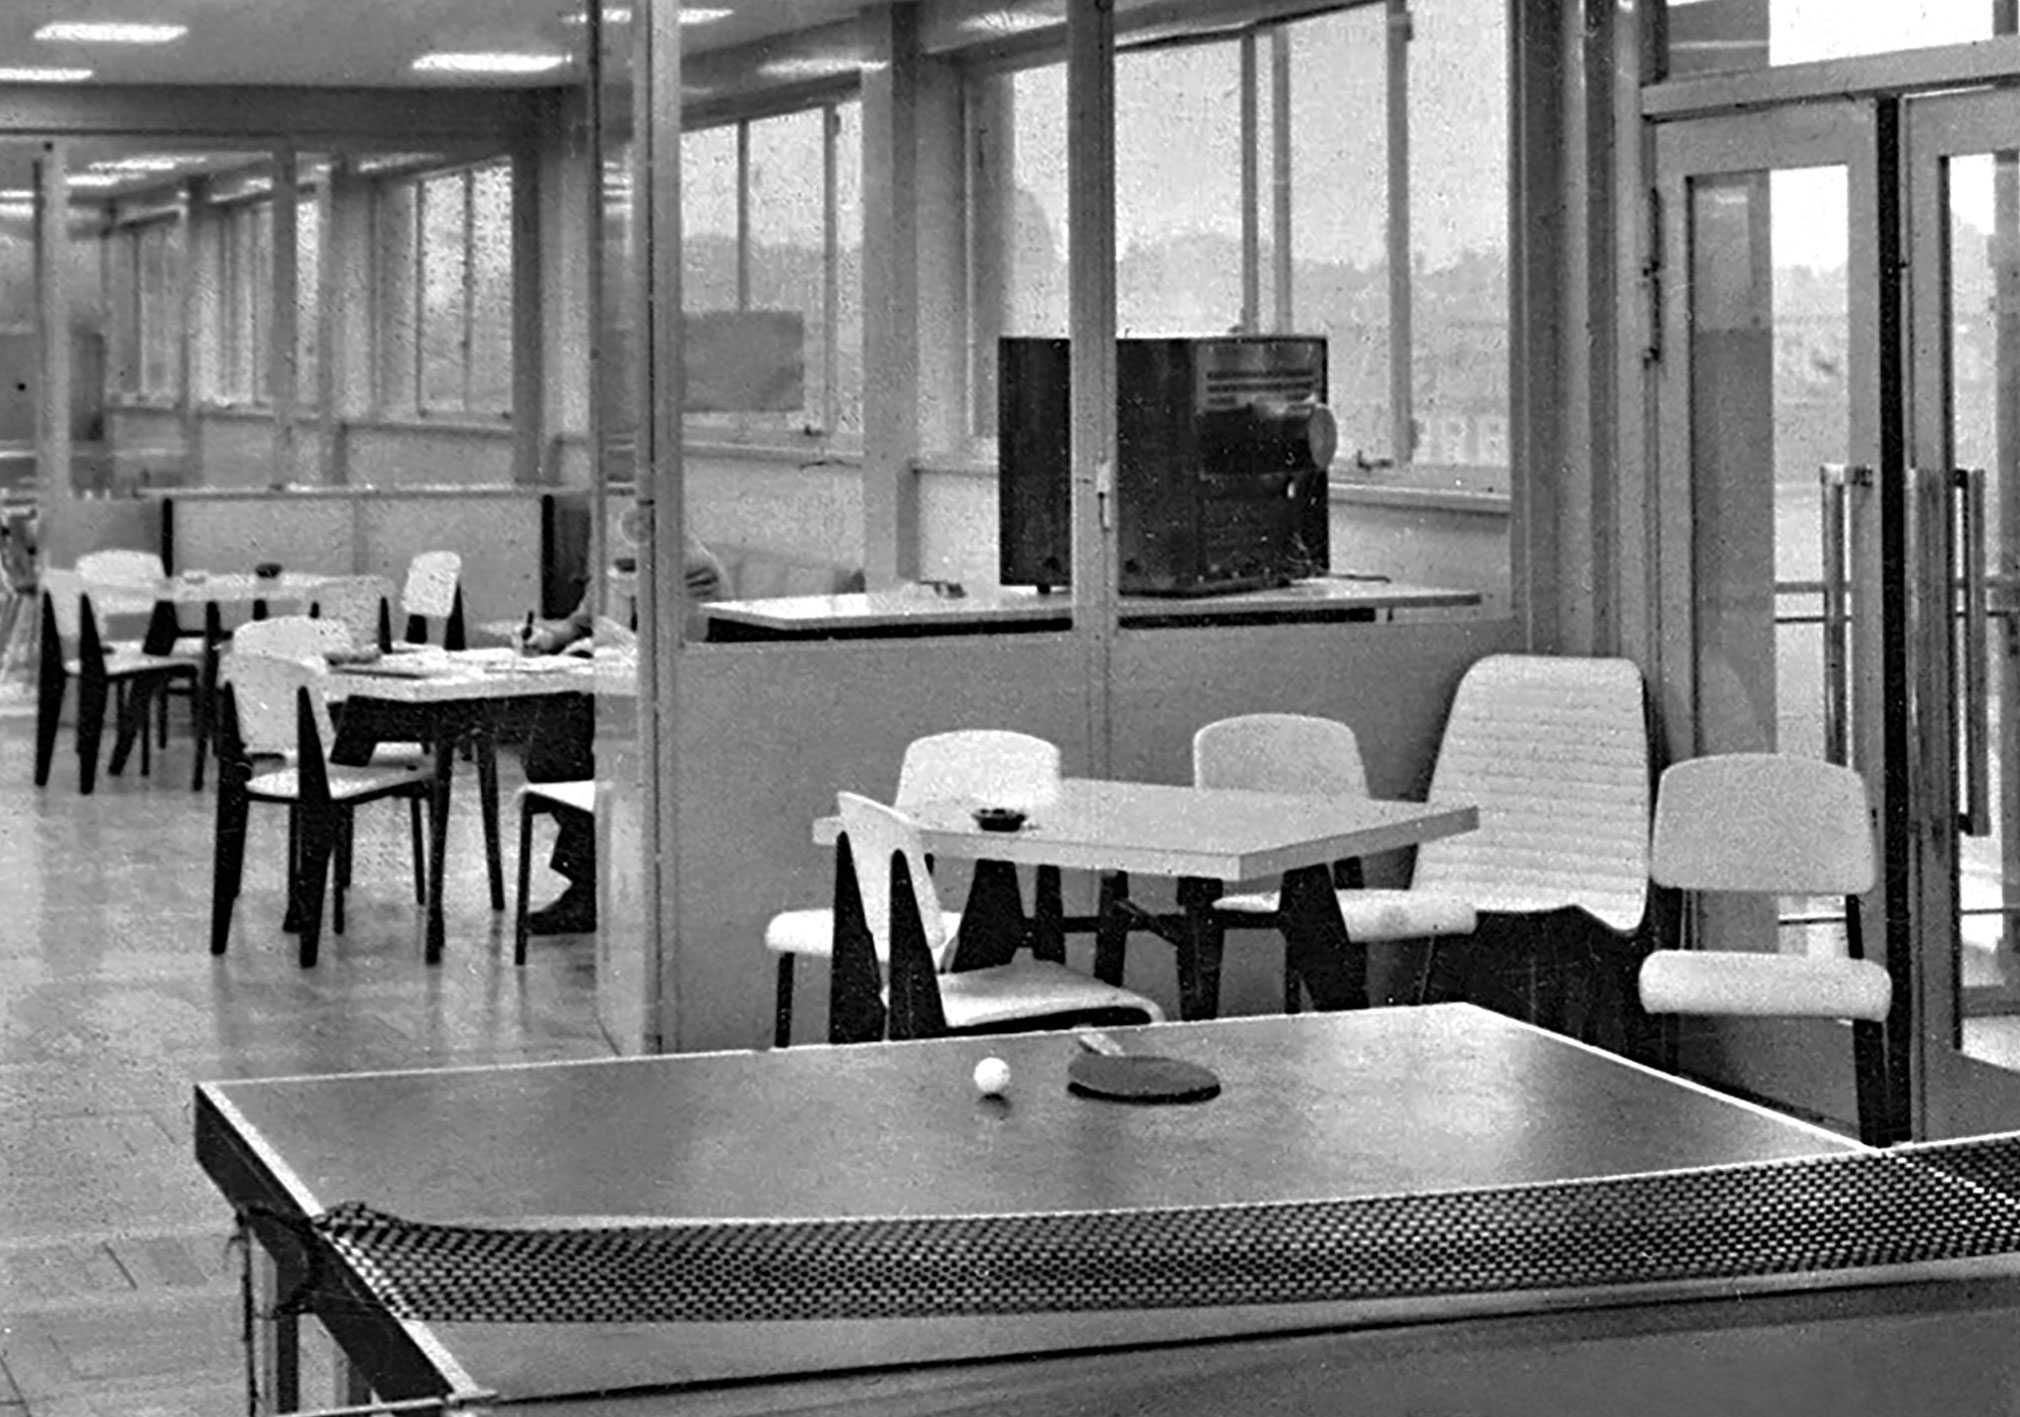 Centre de Réadaptation Fonctionnelle, Nancy (architects R. Lamoise and R. Malot, 1955–1958). Refectory and games room equipped with Cafétéria no. 511 Guéridons, no. 305 chairs, and no. 356 armchairs, ca. 1958.